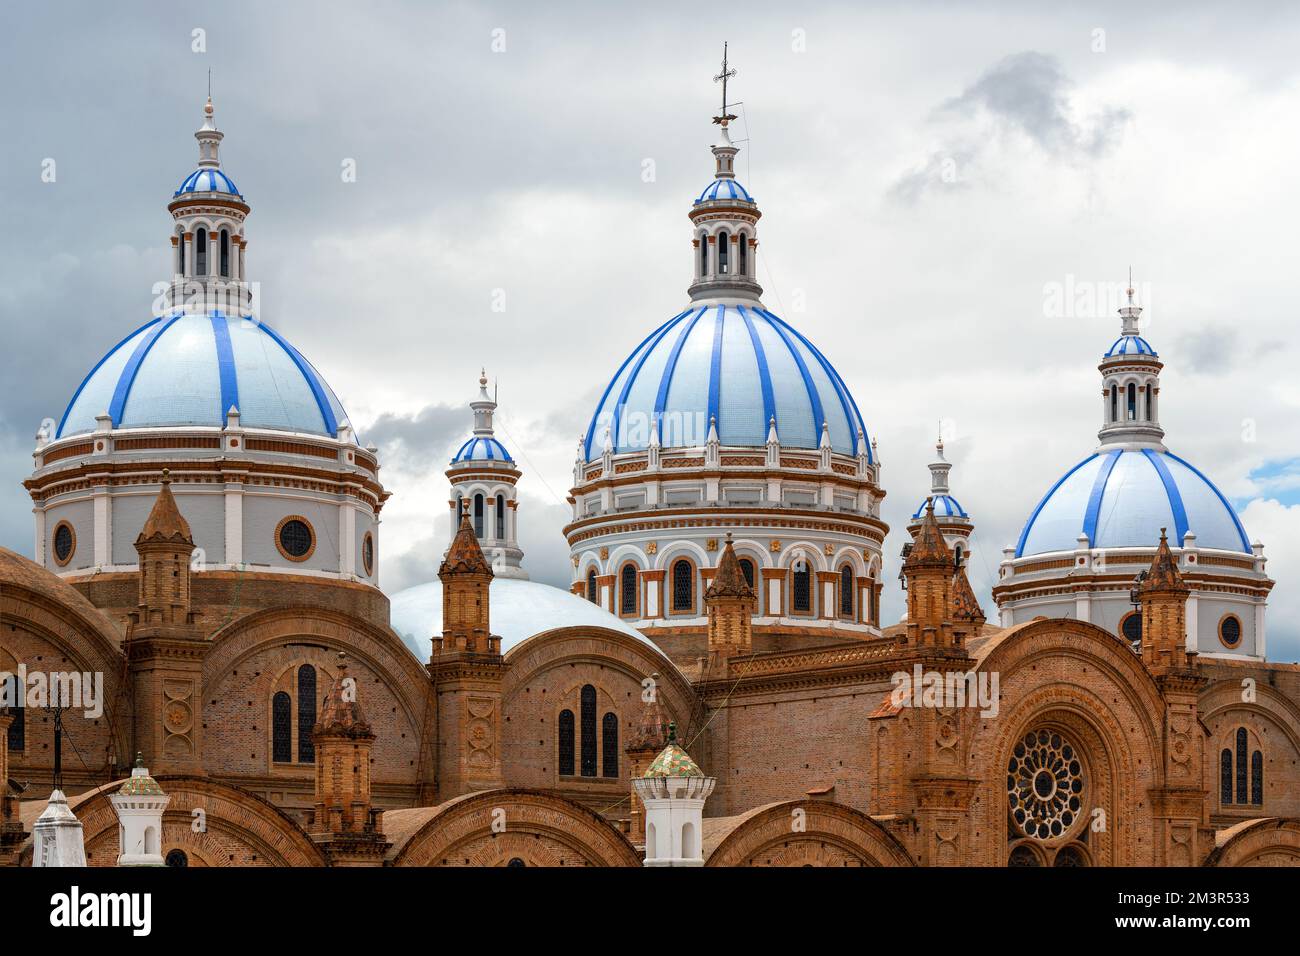 Domes of the New Cathedral, Cuenca, Ecuador. Stock Photo